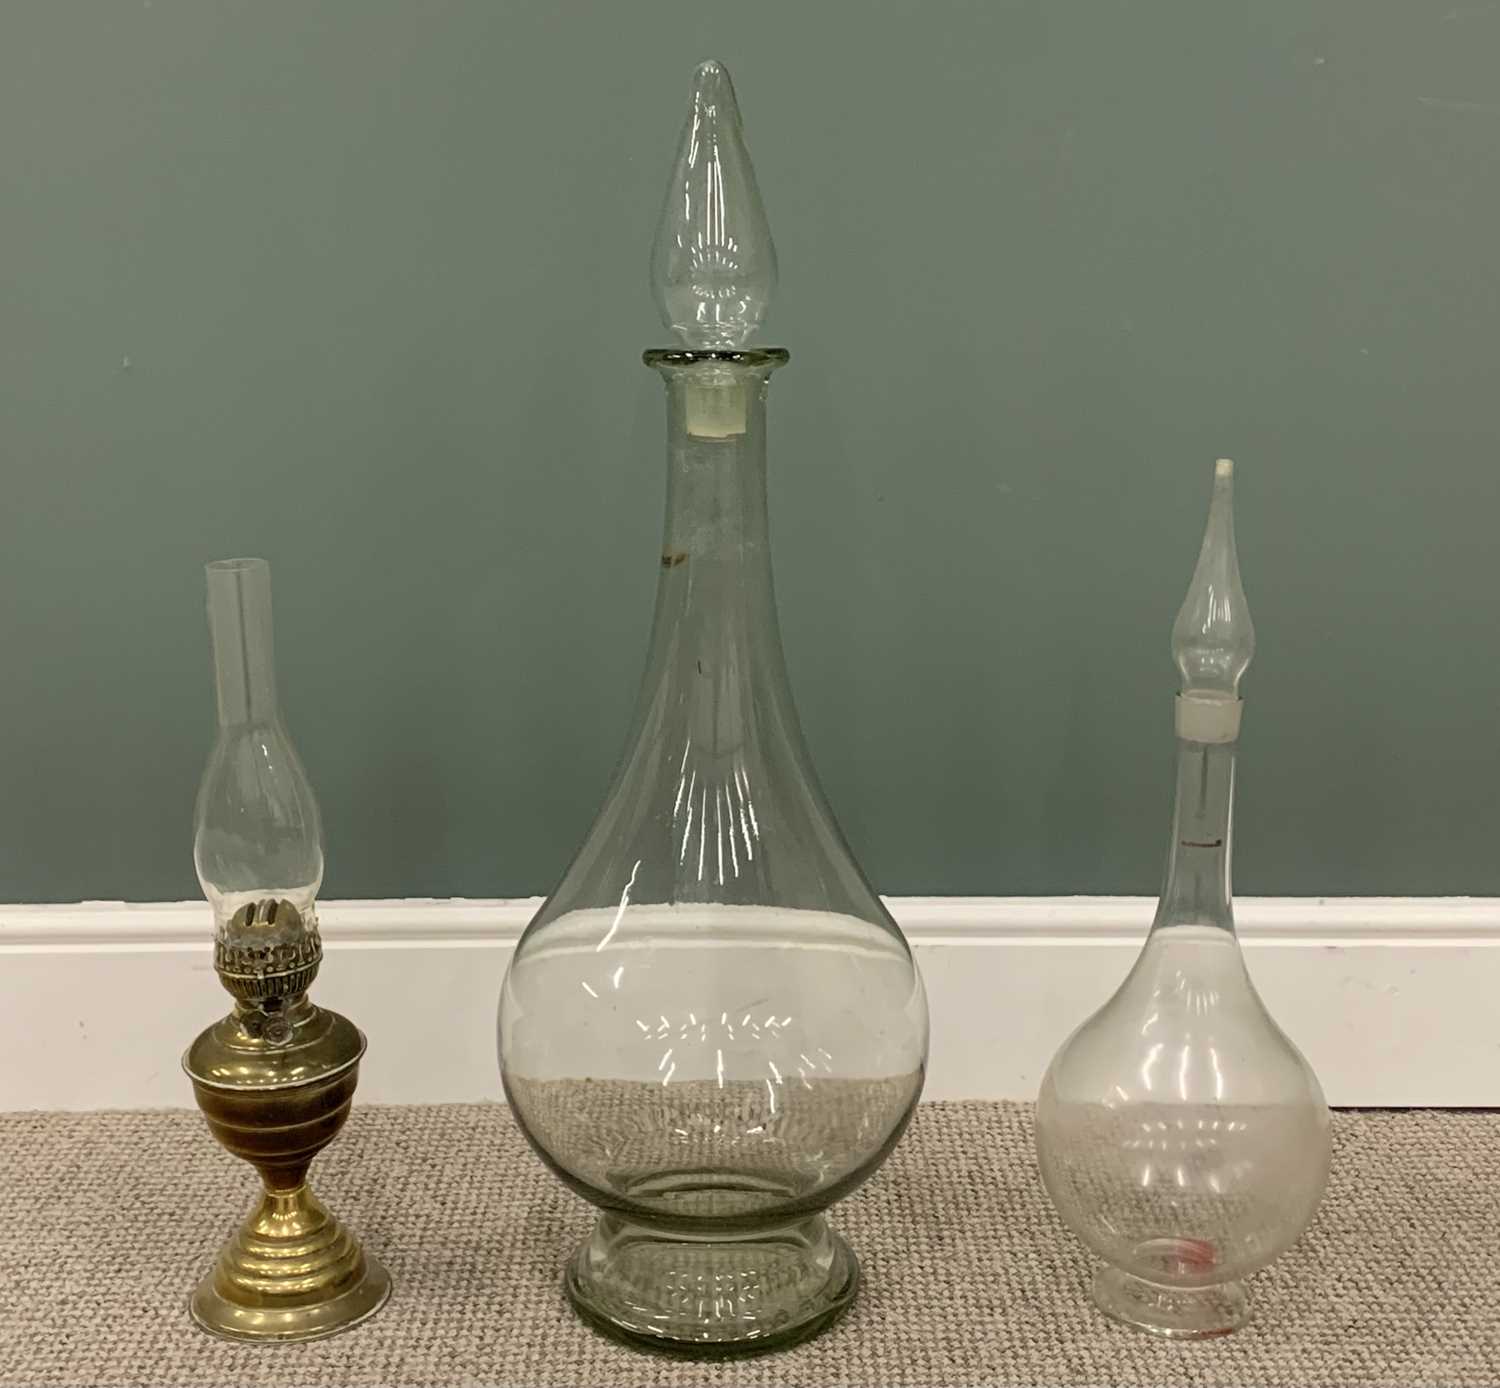 APOTHECARY GLASS DISPLAY CARBOYS x 2 & VINTAGE BRASS OIL LAMP, both carboys with original